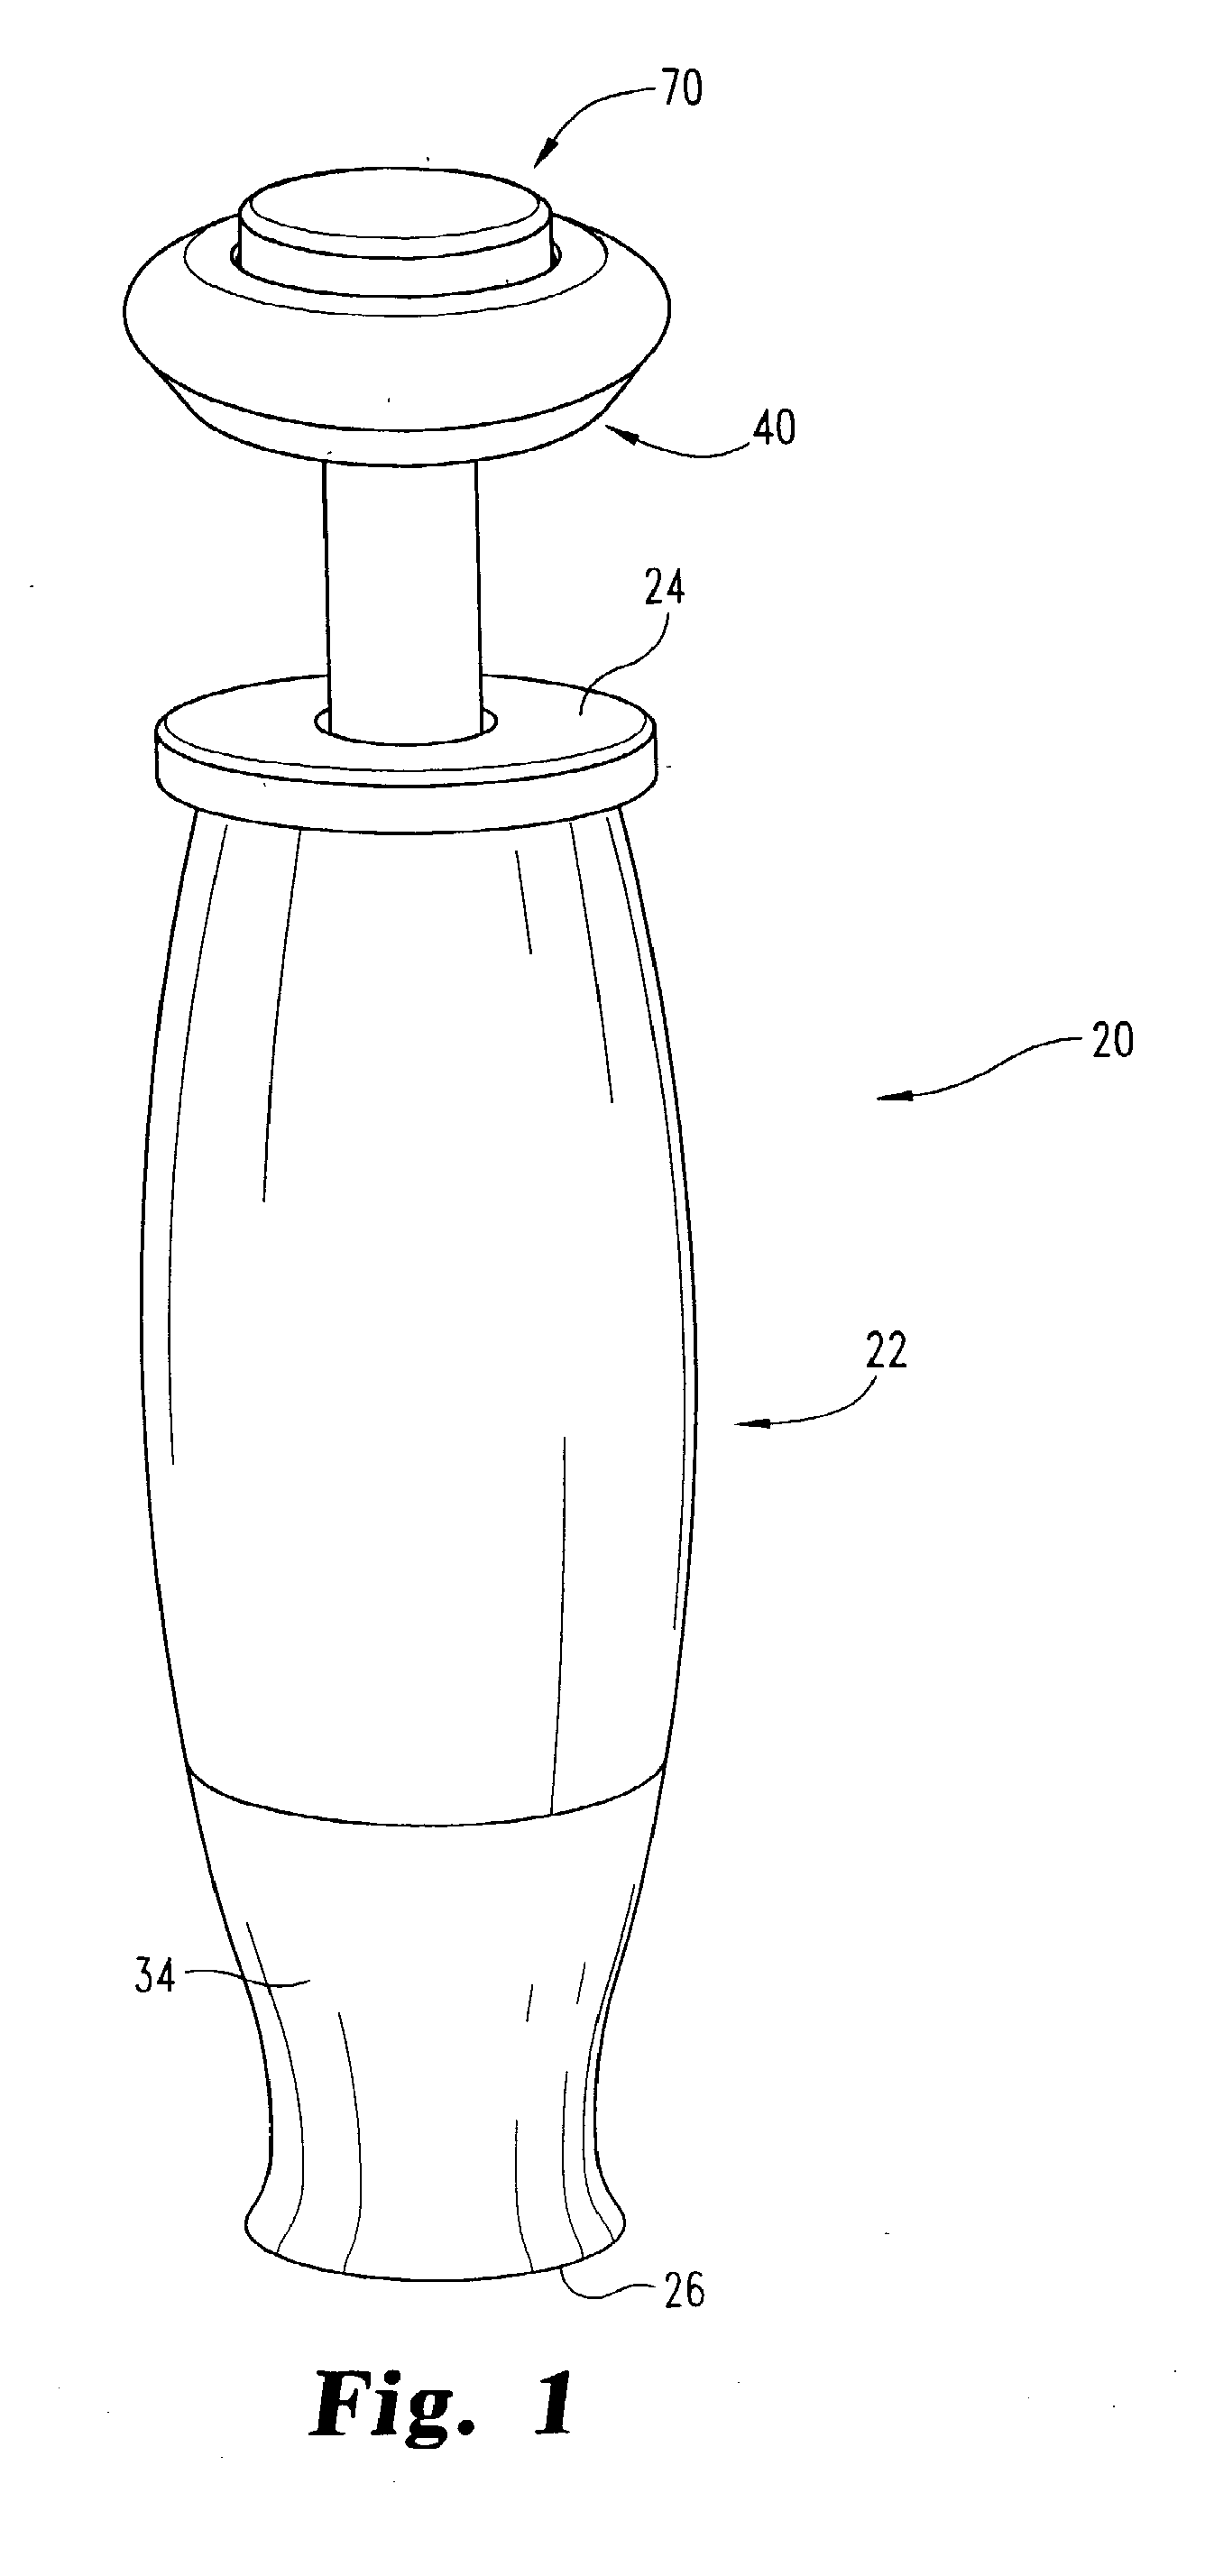 Needled pharmaceutical delivery device with triggered automatic needle insertion and manually controlled pharmaceutical injection